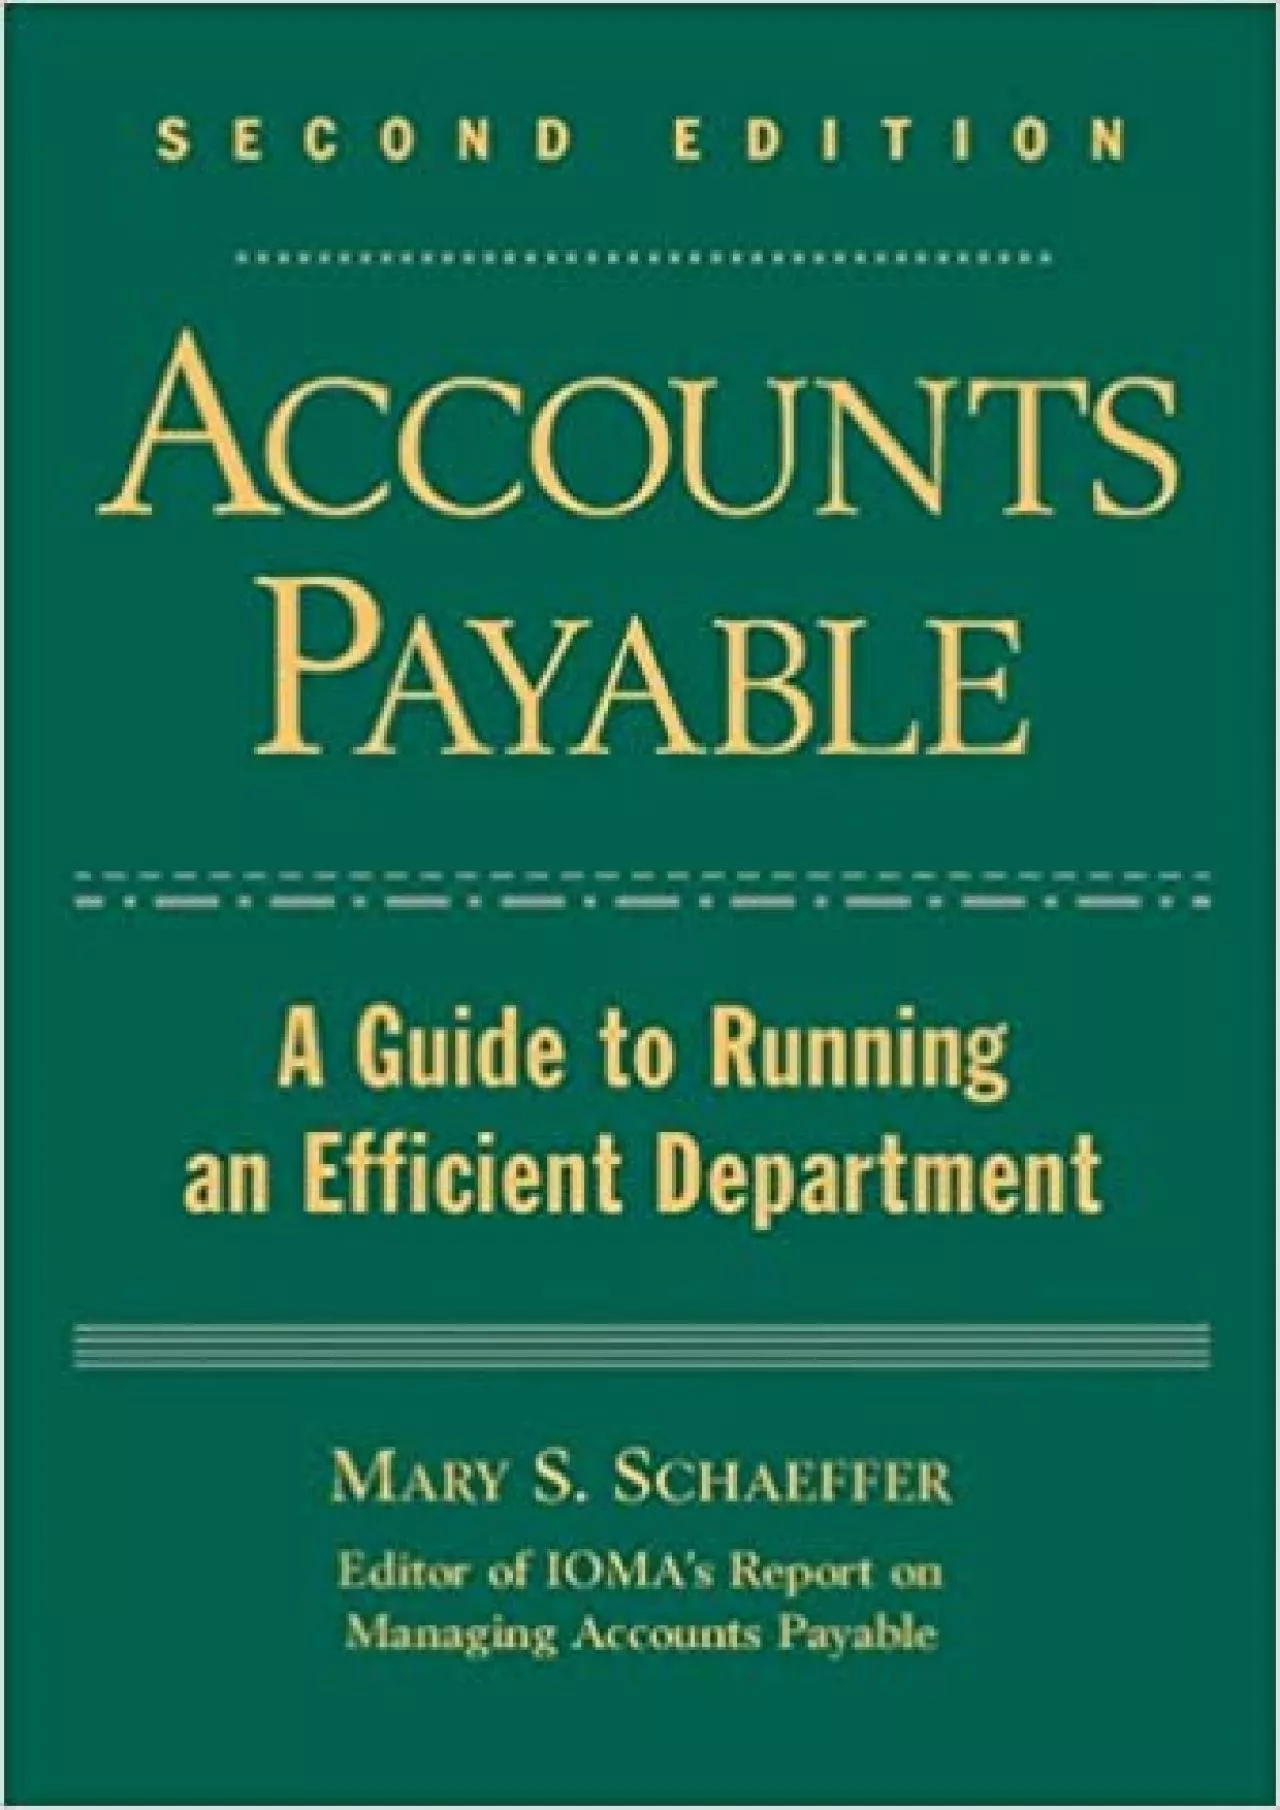 Accounts Payable: A Guide to Running an Efficient Department